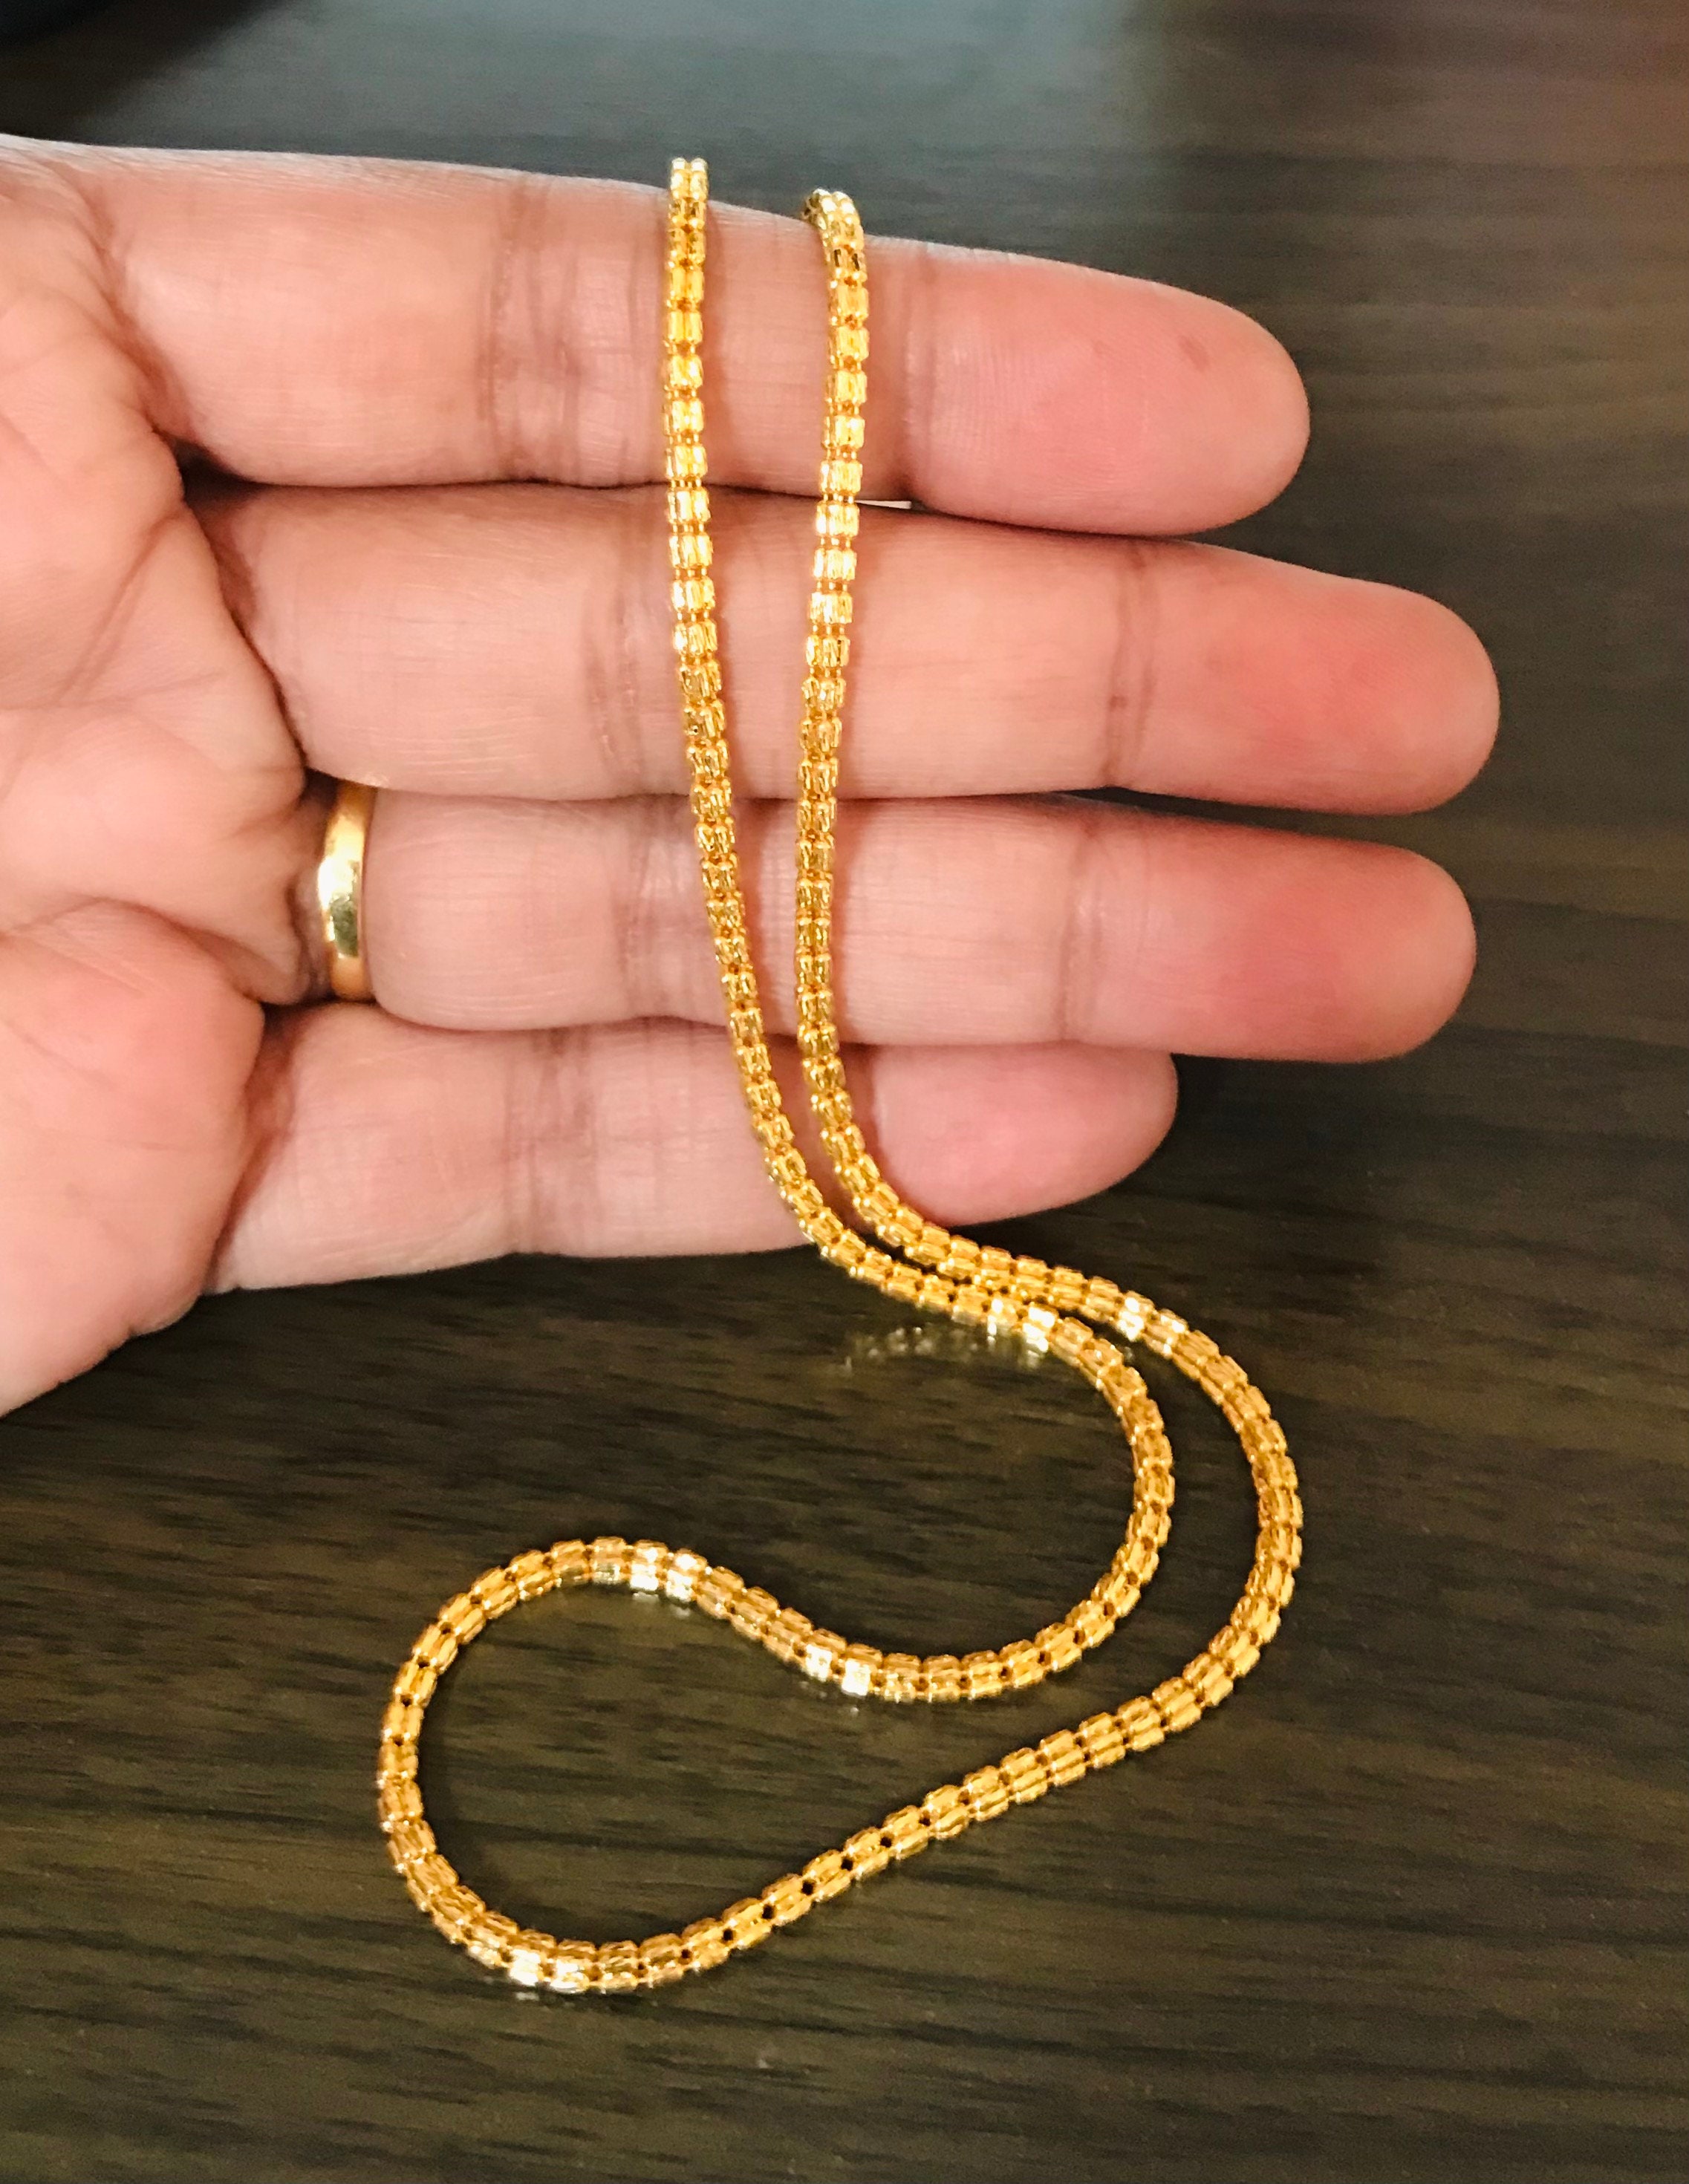 Male 22 KARAT GOLD CHAIN FOR MEN, 10 Gm To Onwards